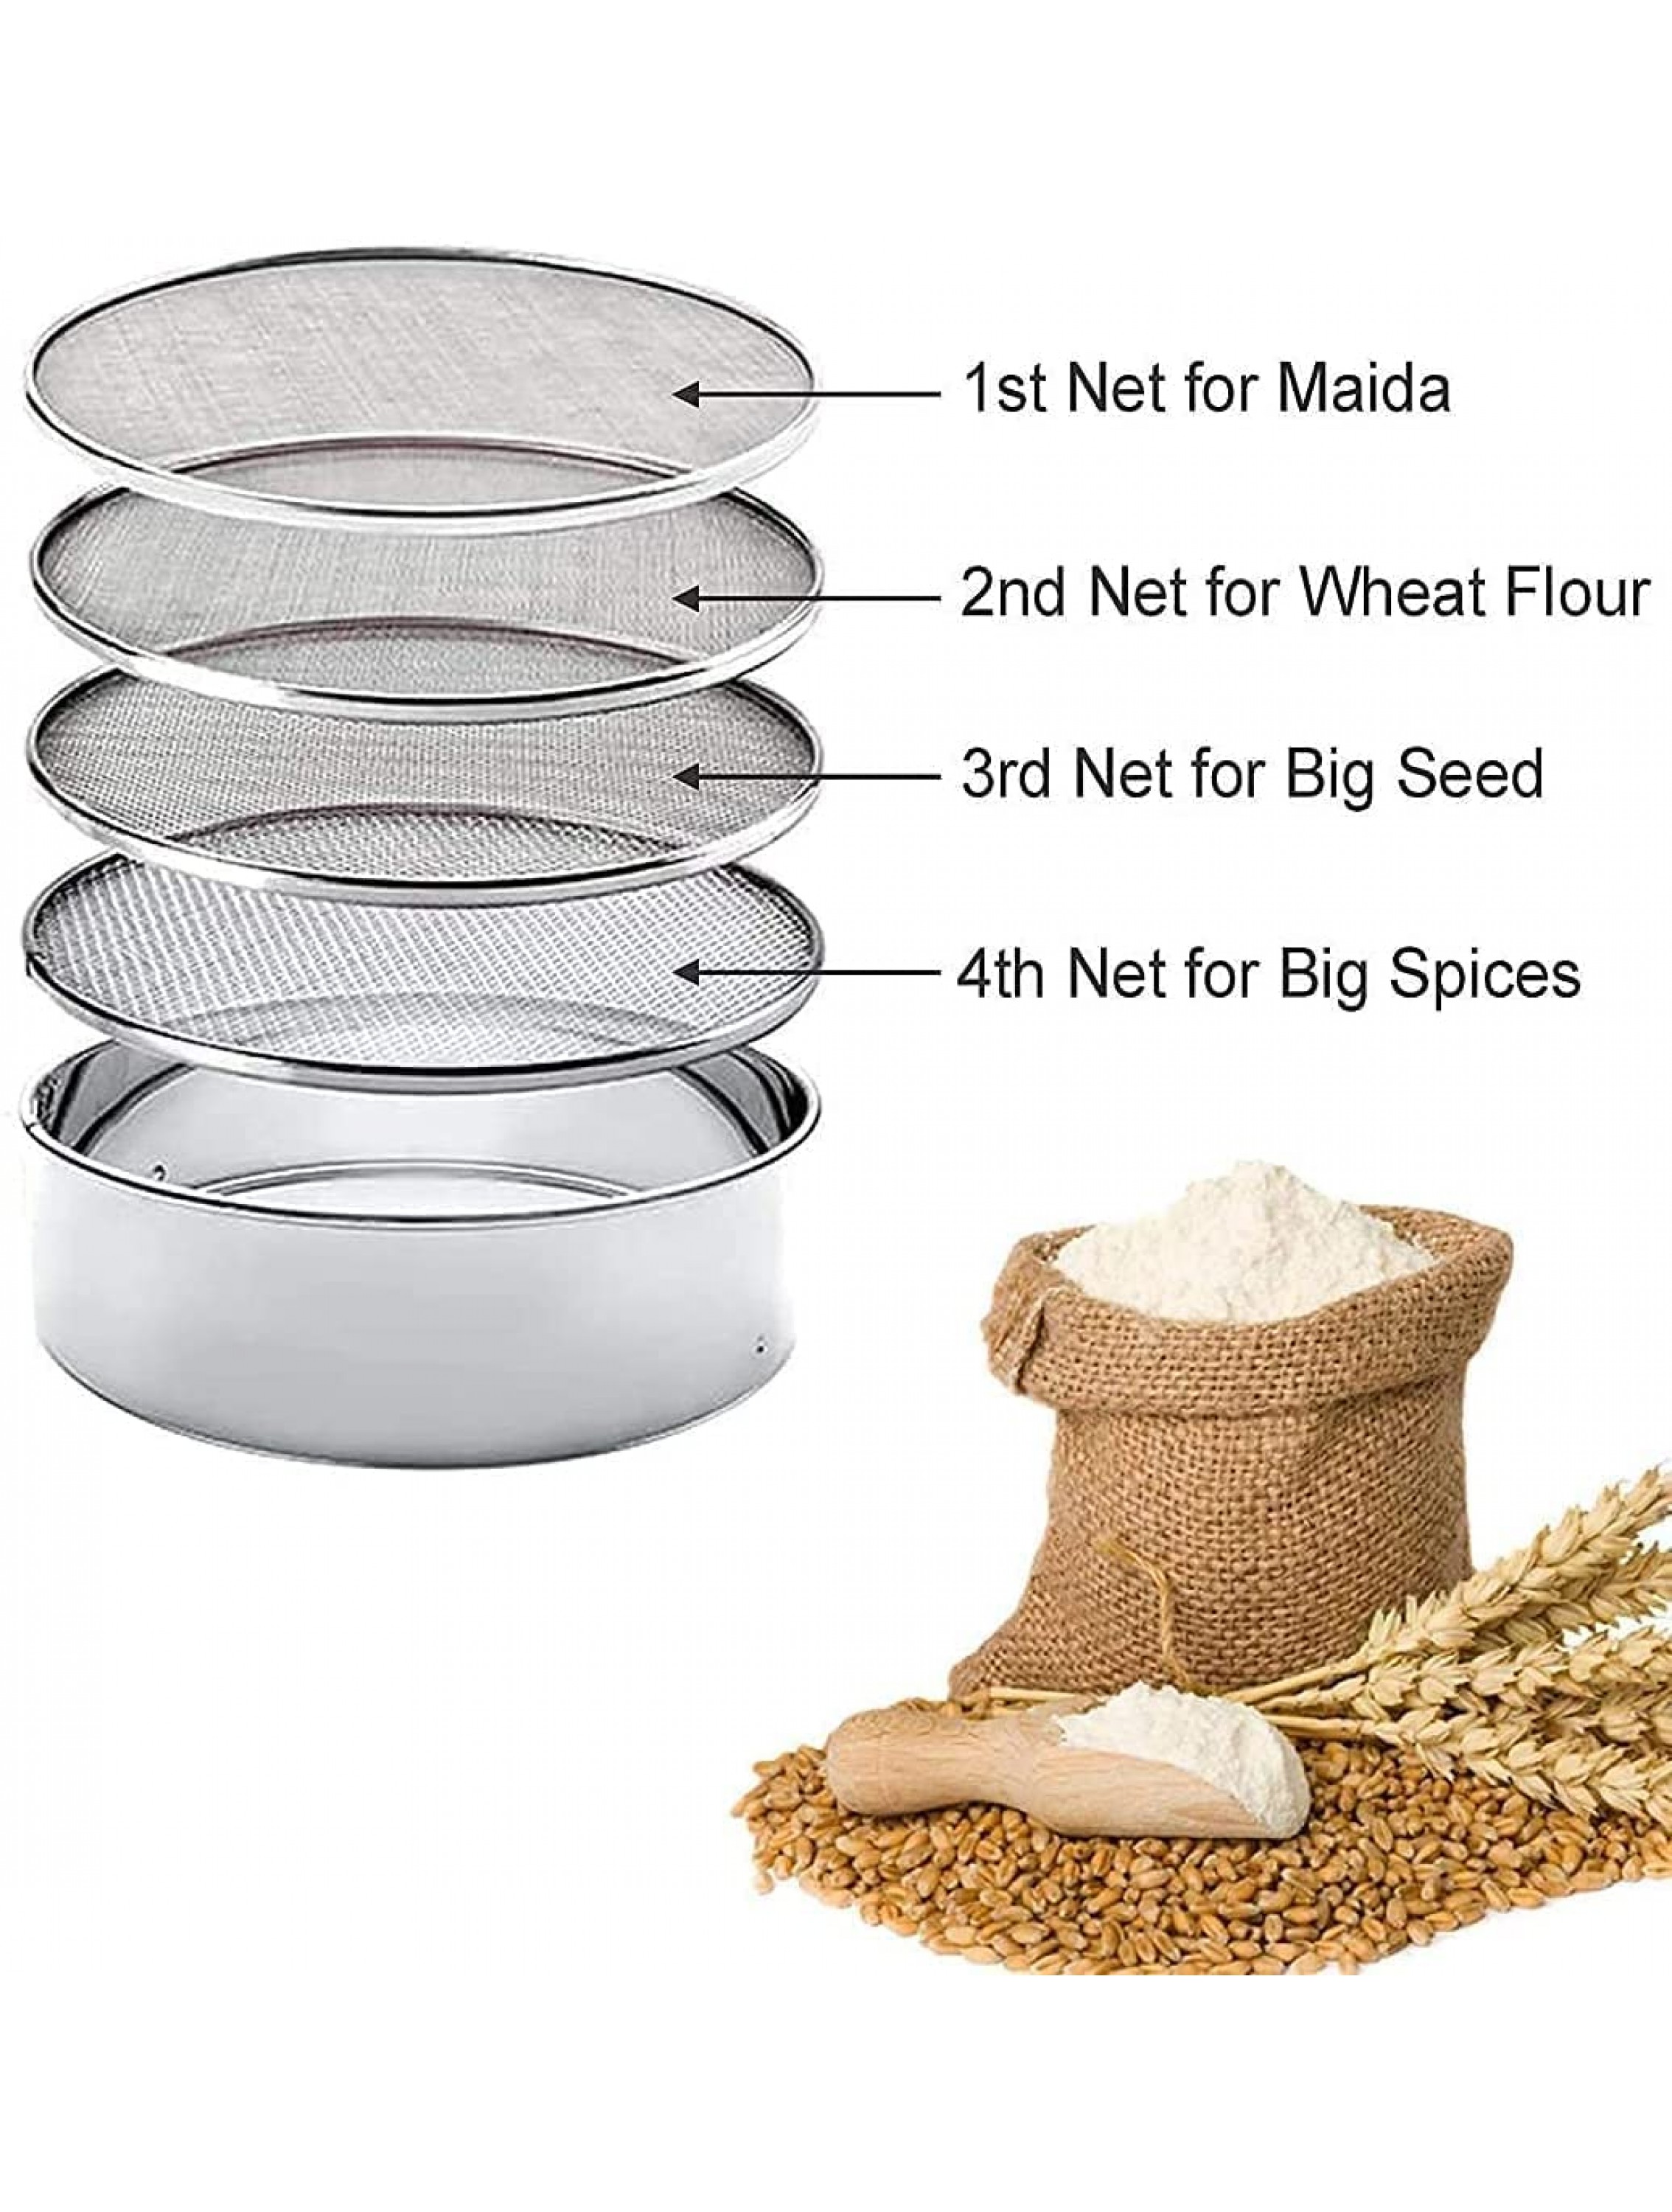 Vaishnavi Creations 4 In 1 Stainless Steel Interchangeable Sieve Set of 5 Flour Spices Food Strainers Atta Chalni Jaali Channi Atta Maida Strainer Silver Length 8 Inch Width Height 2.5 Inch - BRXWL0Q1F